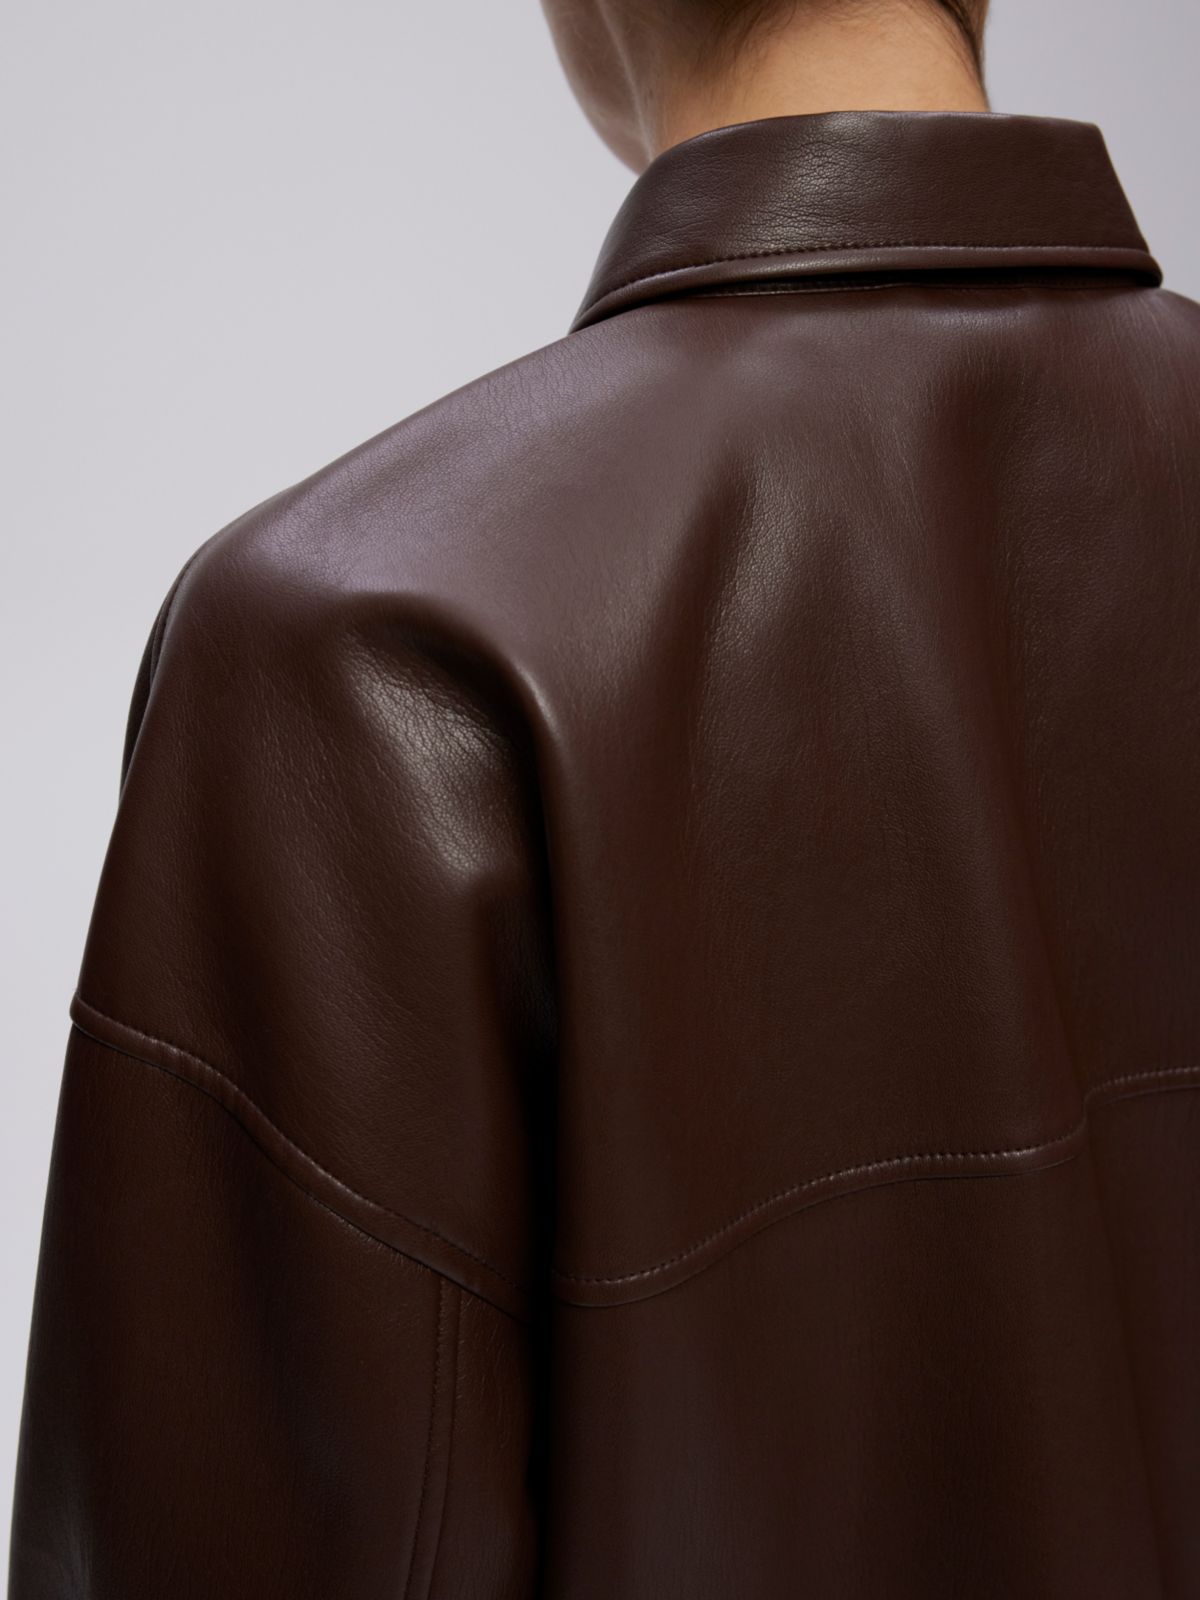 Everything you need to know about pleather care